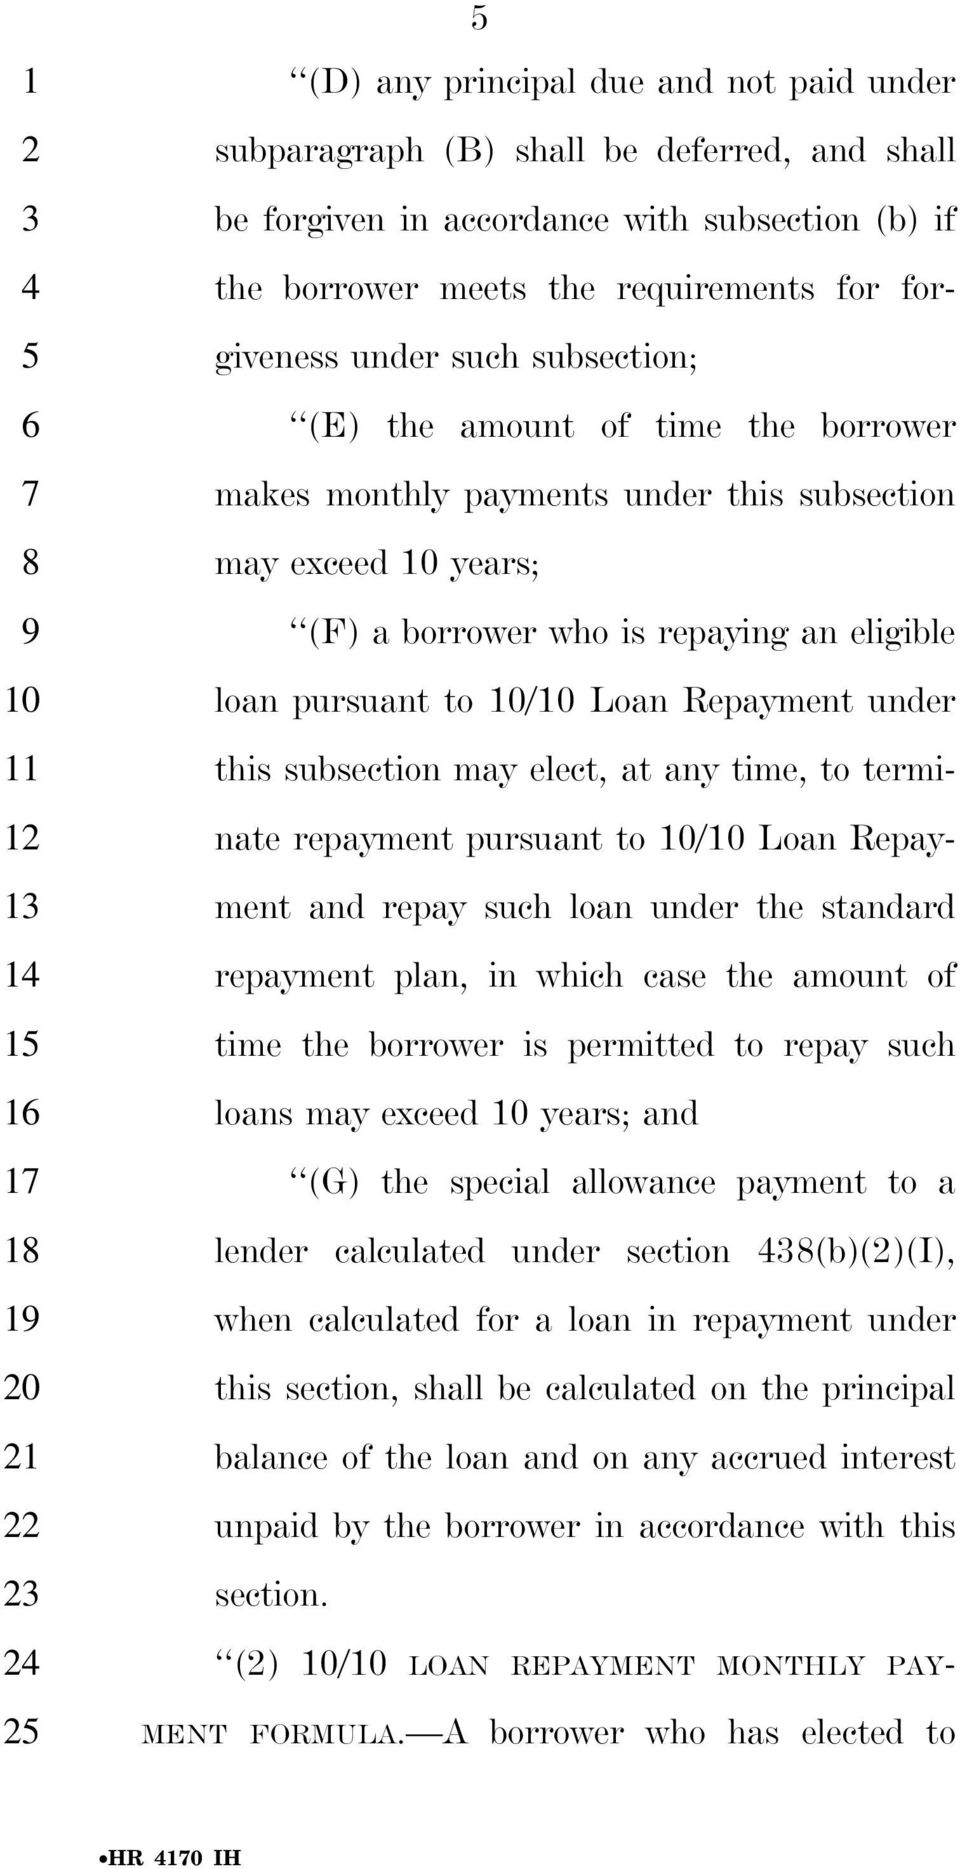 under this subsection may elect, at any time, to termi- nate repayment pursuant to / Loan Repay- ment and repay such loan under the standard repayment plan, in which case the amount of time the